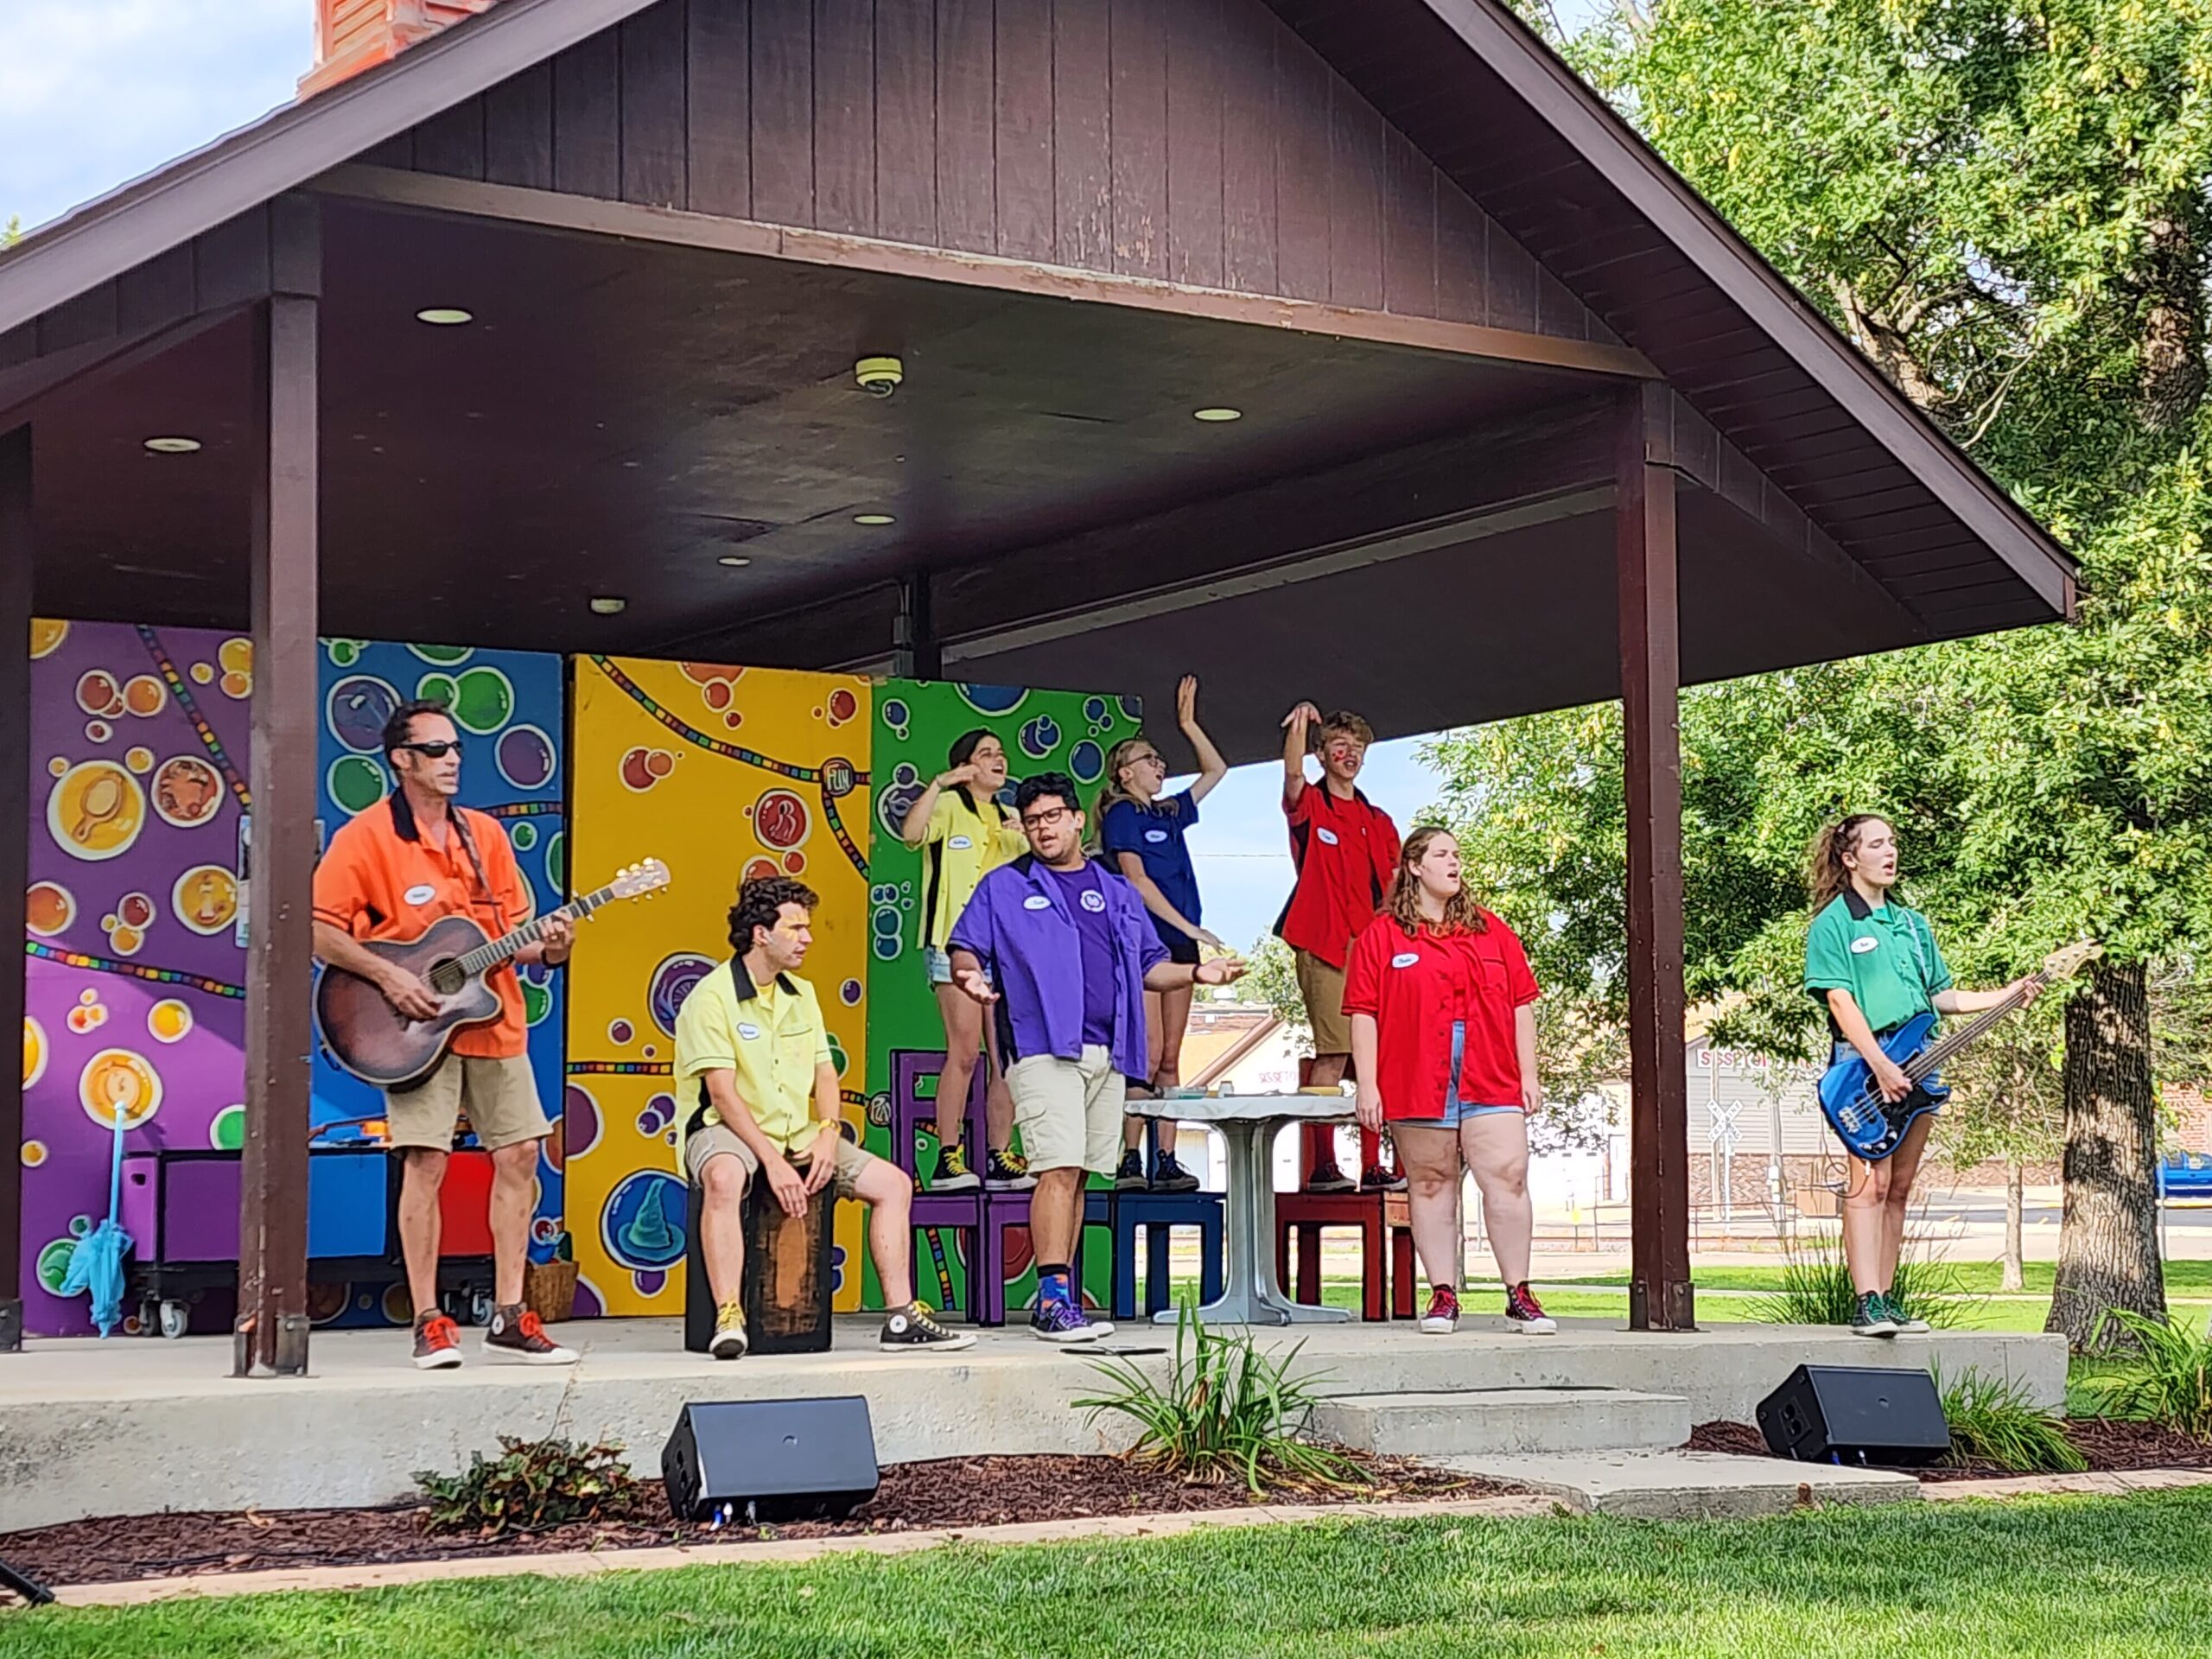 People in colorful shirts perform outside in front of a colorful mural.